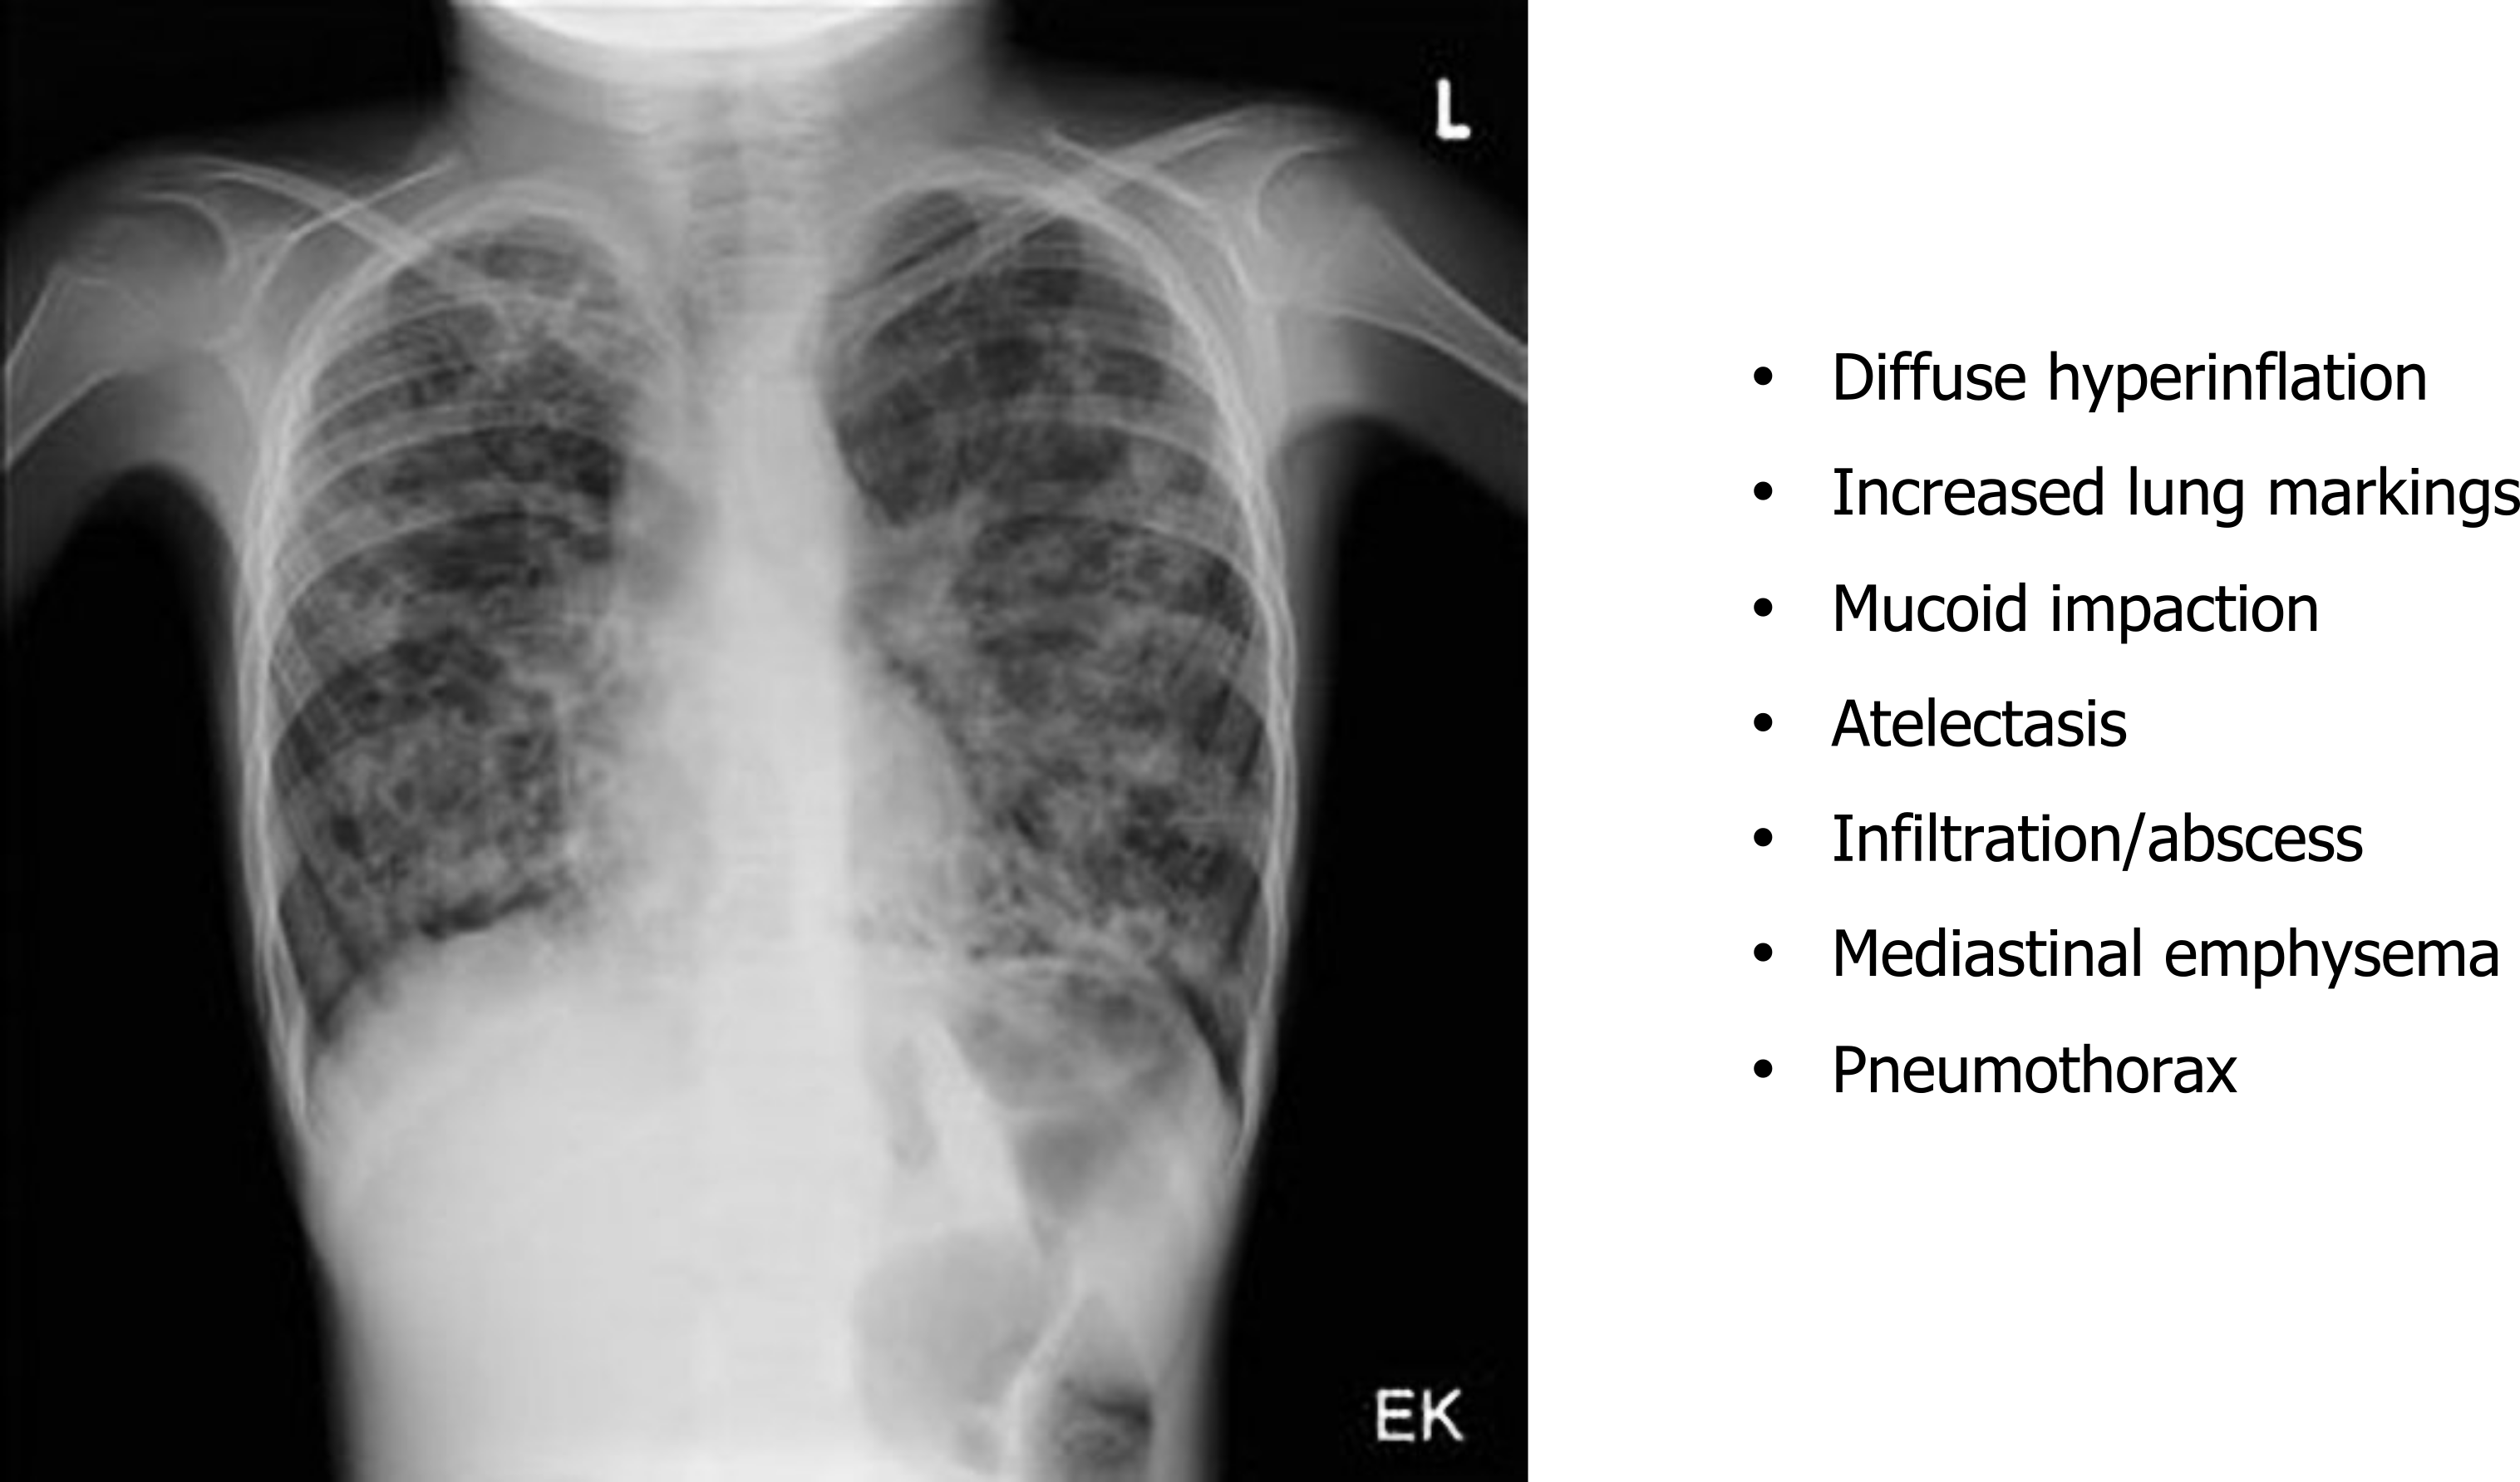 Diffuse hyperinflation, increased lung markings, mucoid impaction, atelectasis, infiltration/abscess, (mediastinal emphysema), (pneumothorax)